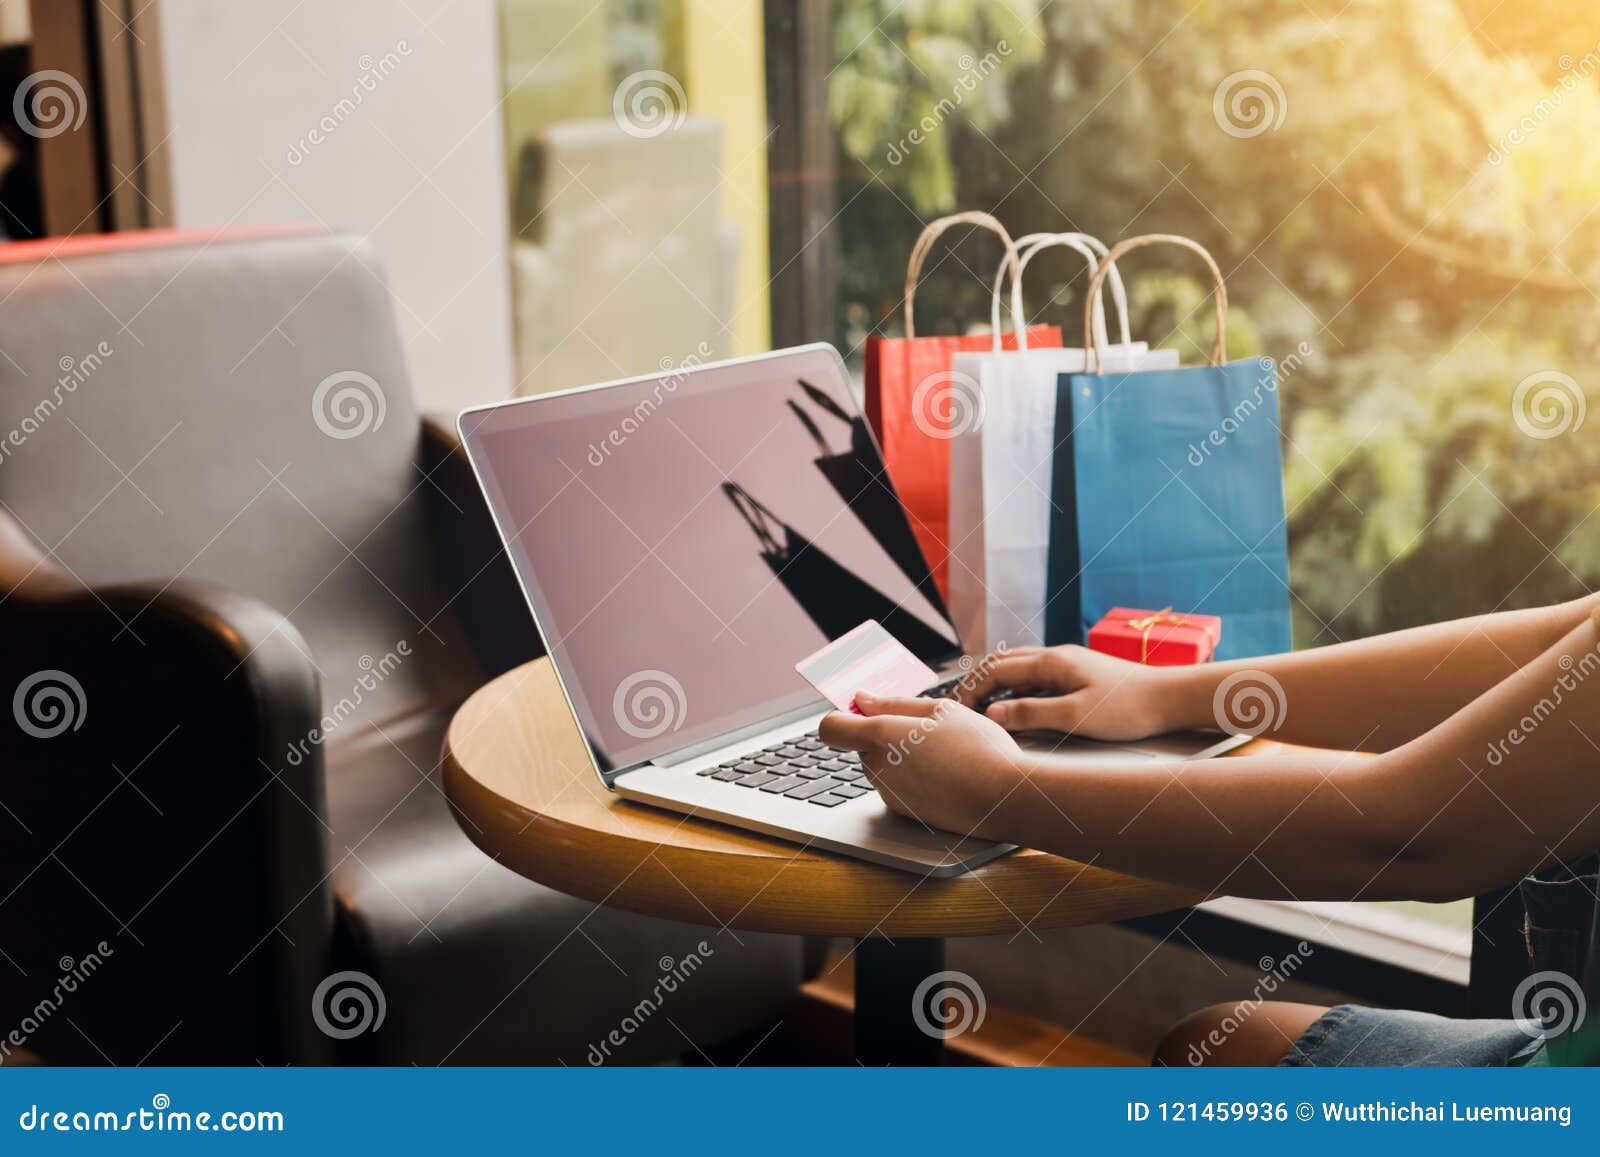 women using laptop for shopping online and earn points to website.